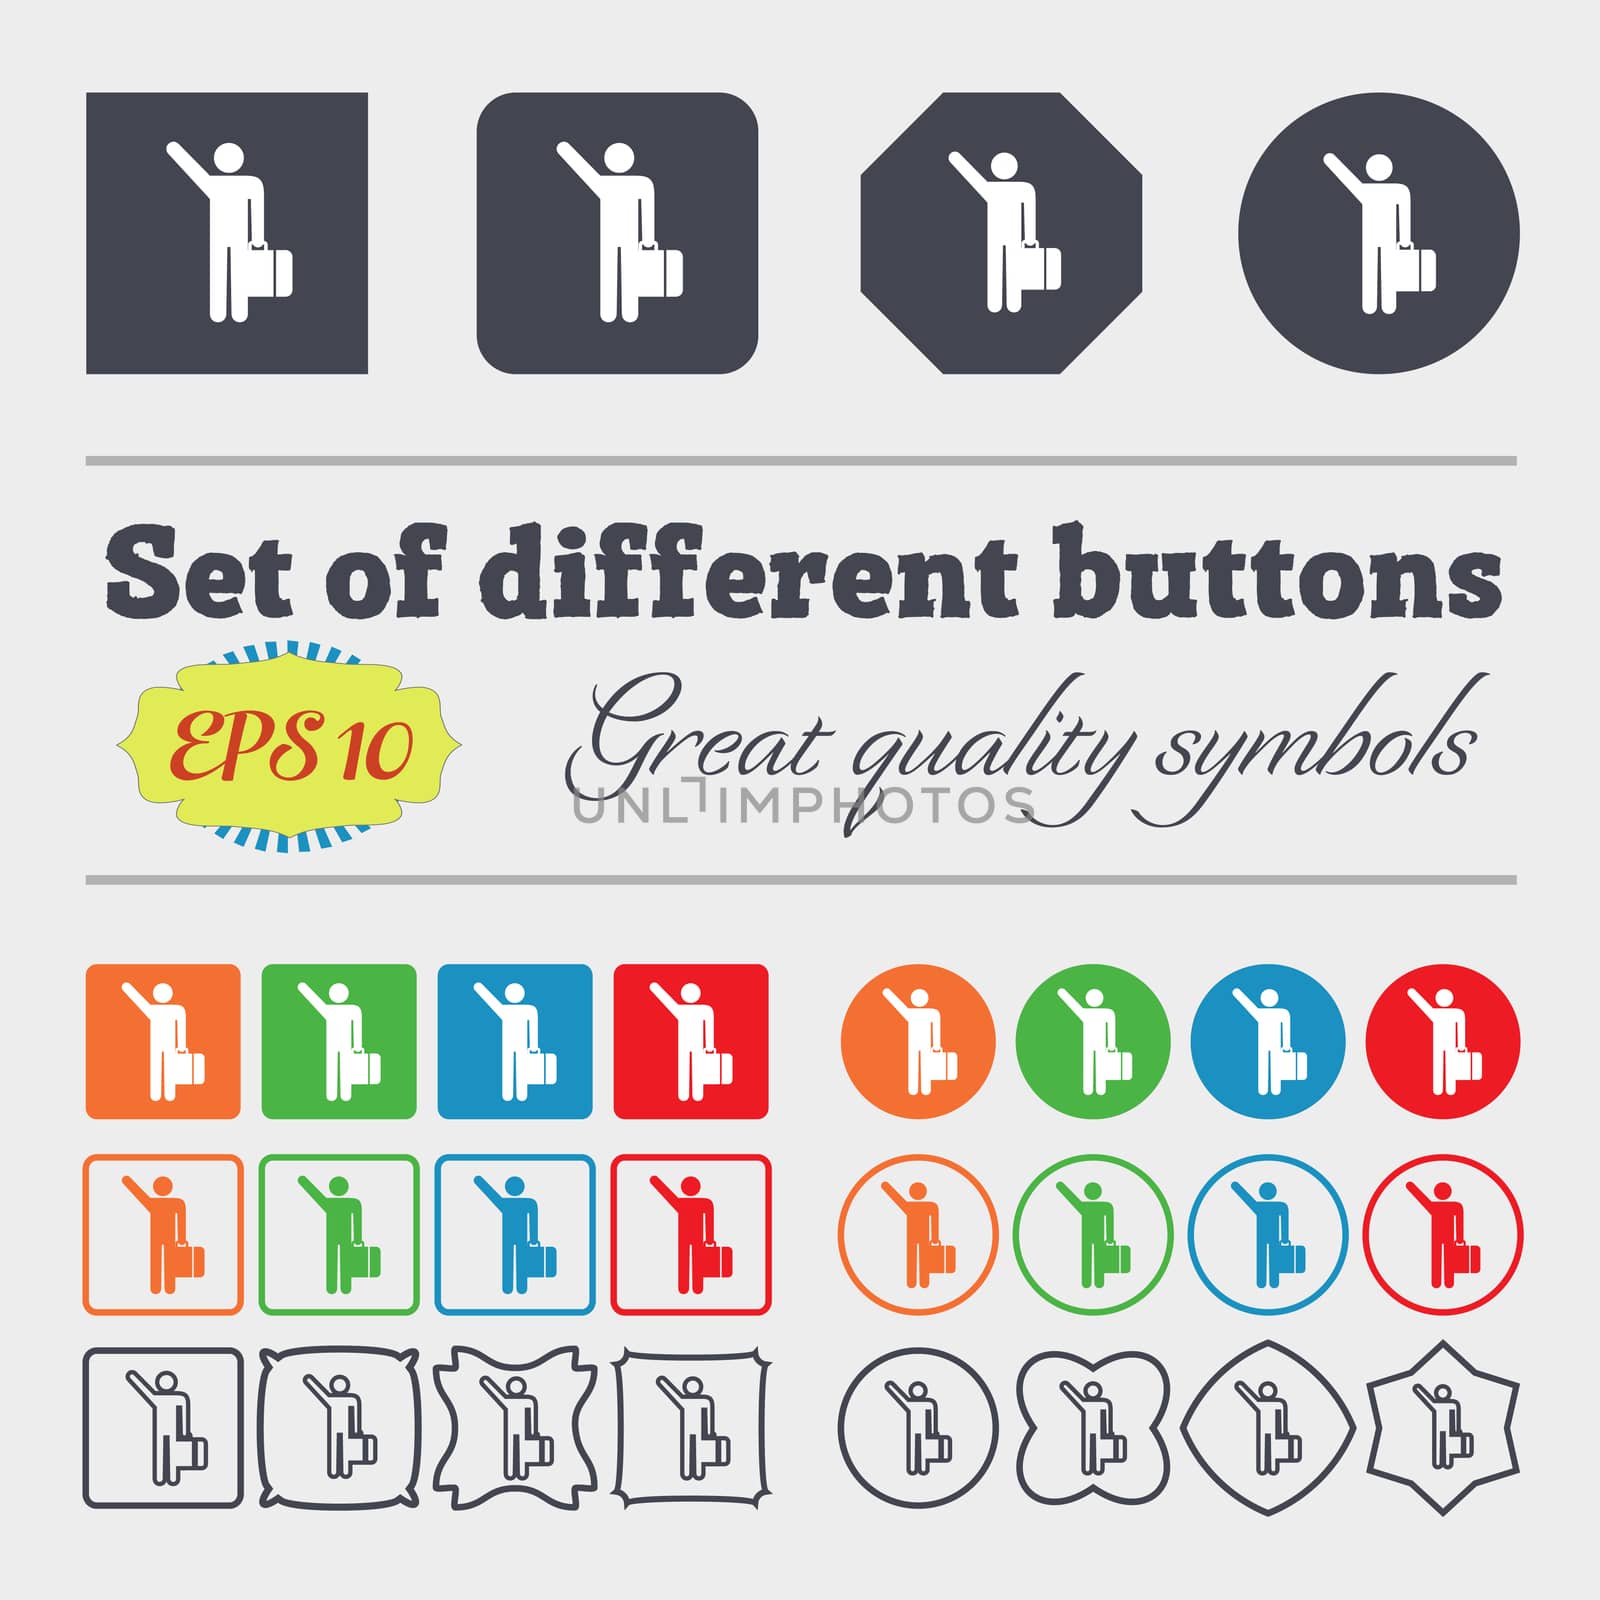 tourist icon sign. Big set of colorful, diverse, high-quality buttons. illustration